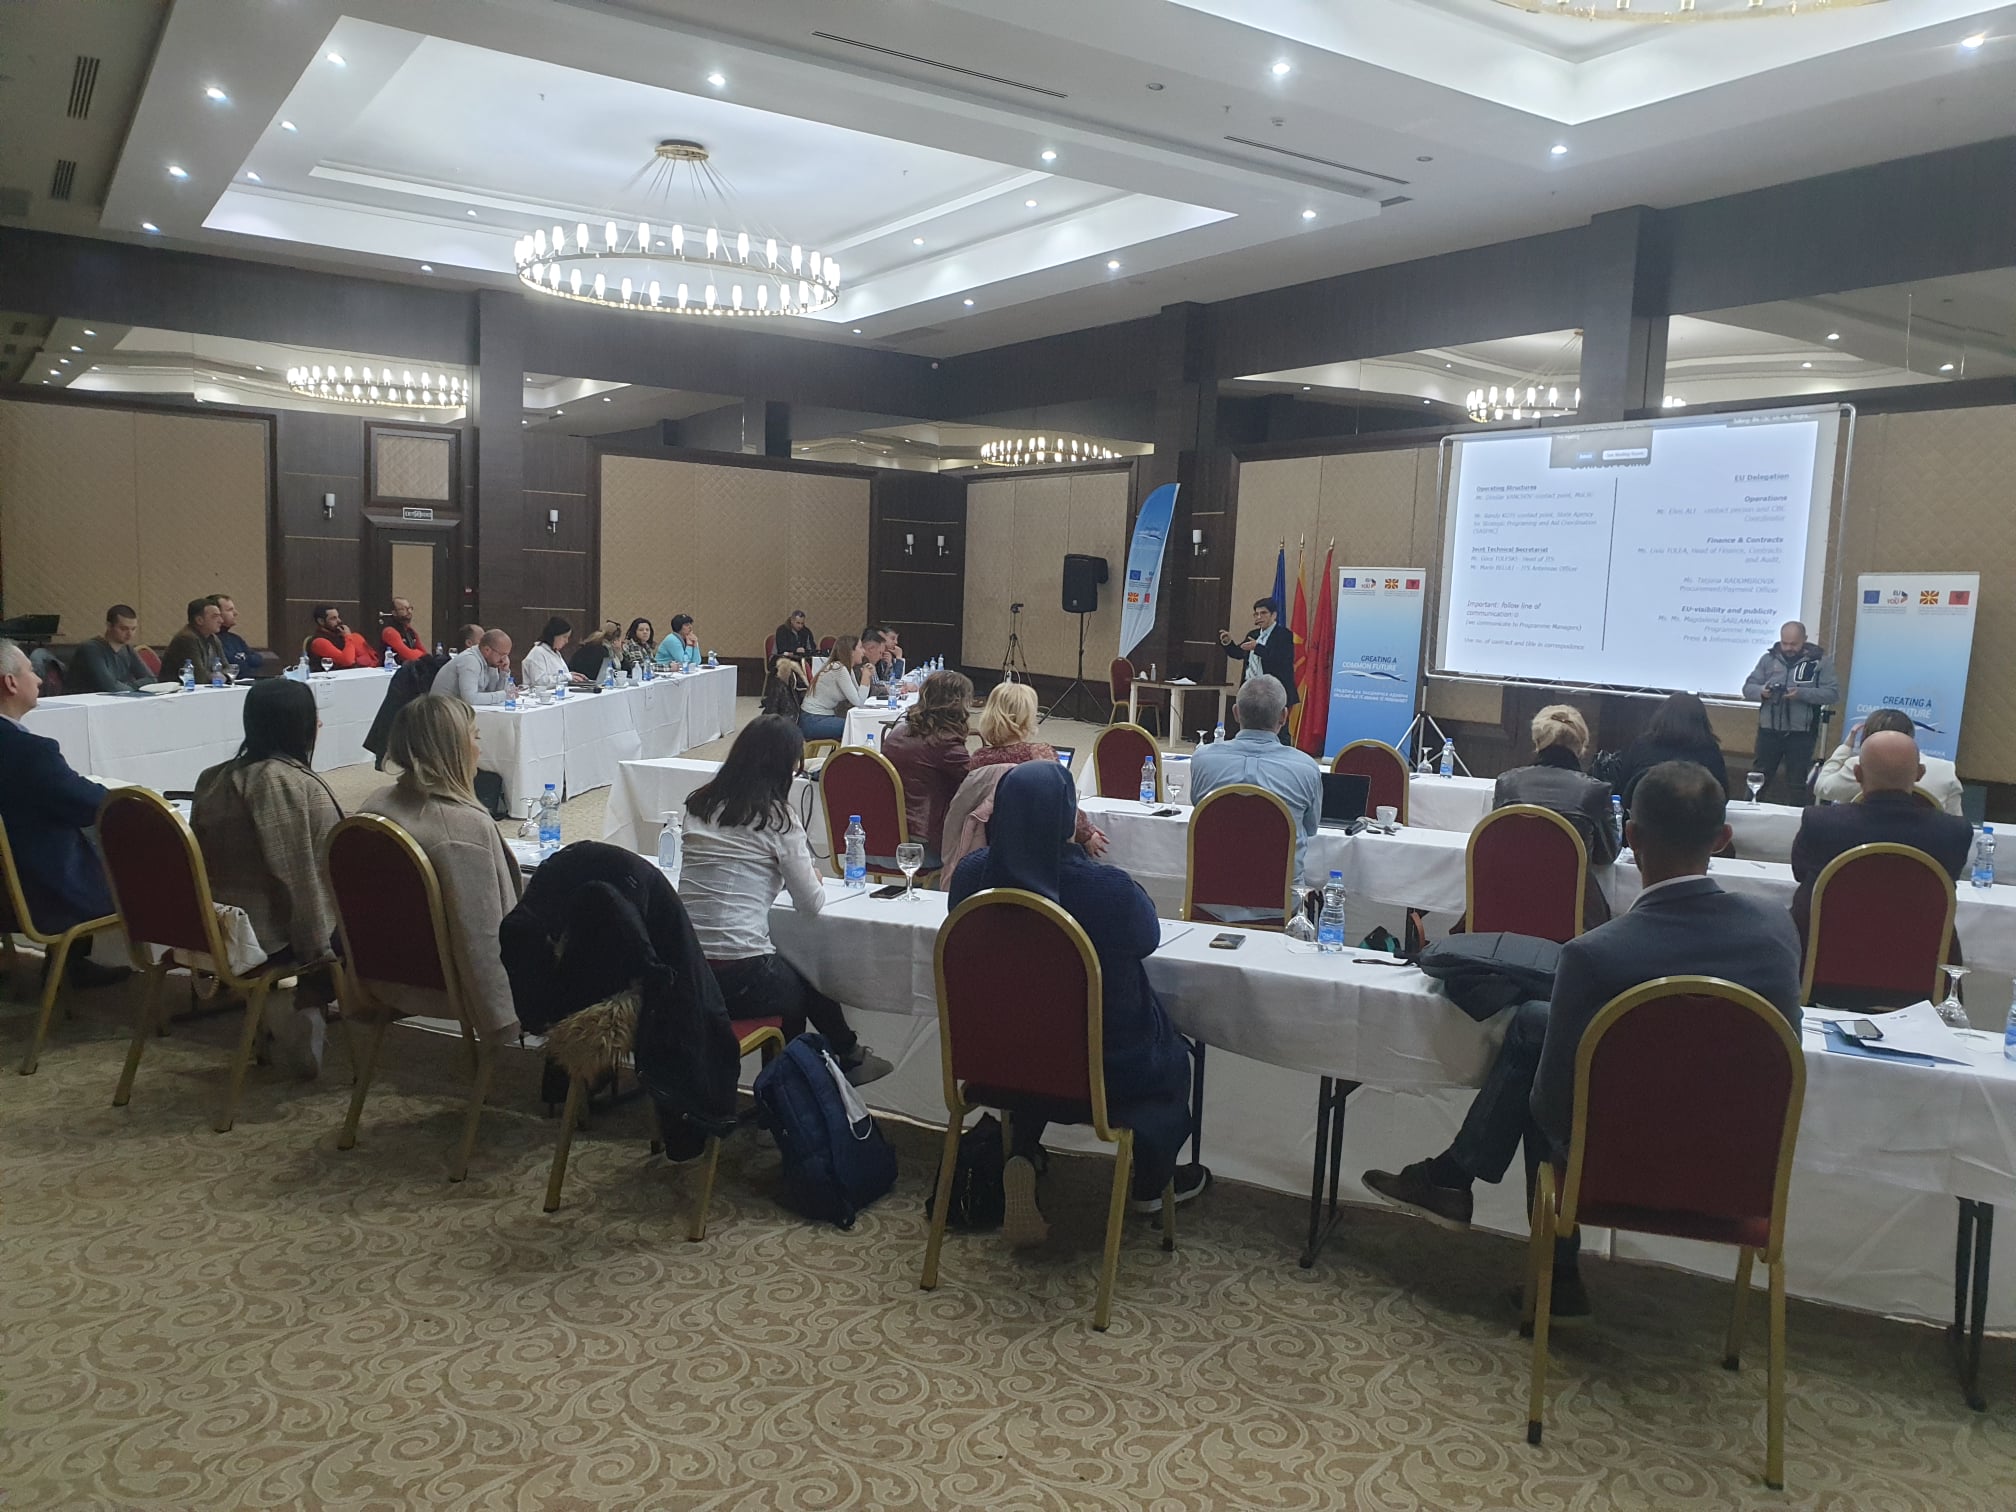 Practical training for management of EU funded grants” for the Grant Beneficiaries under the 3rd Call for proposals of the IPA CBC Prograame, organized in Struga, North Macedonia on 29 and 30 March 2022